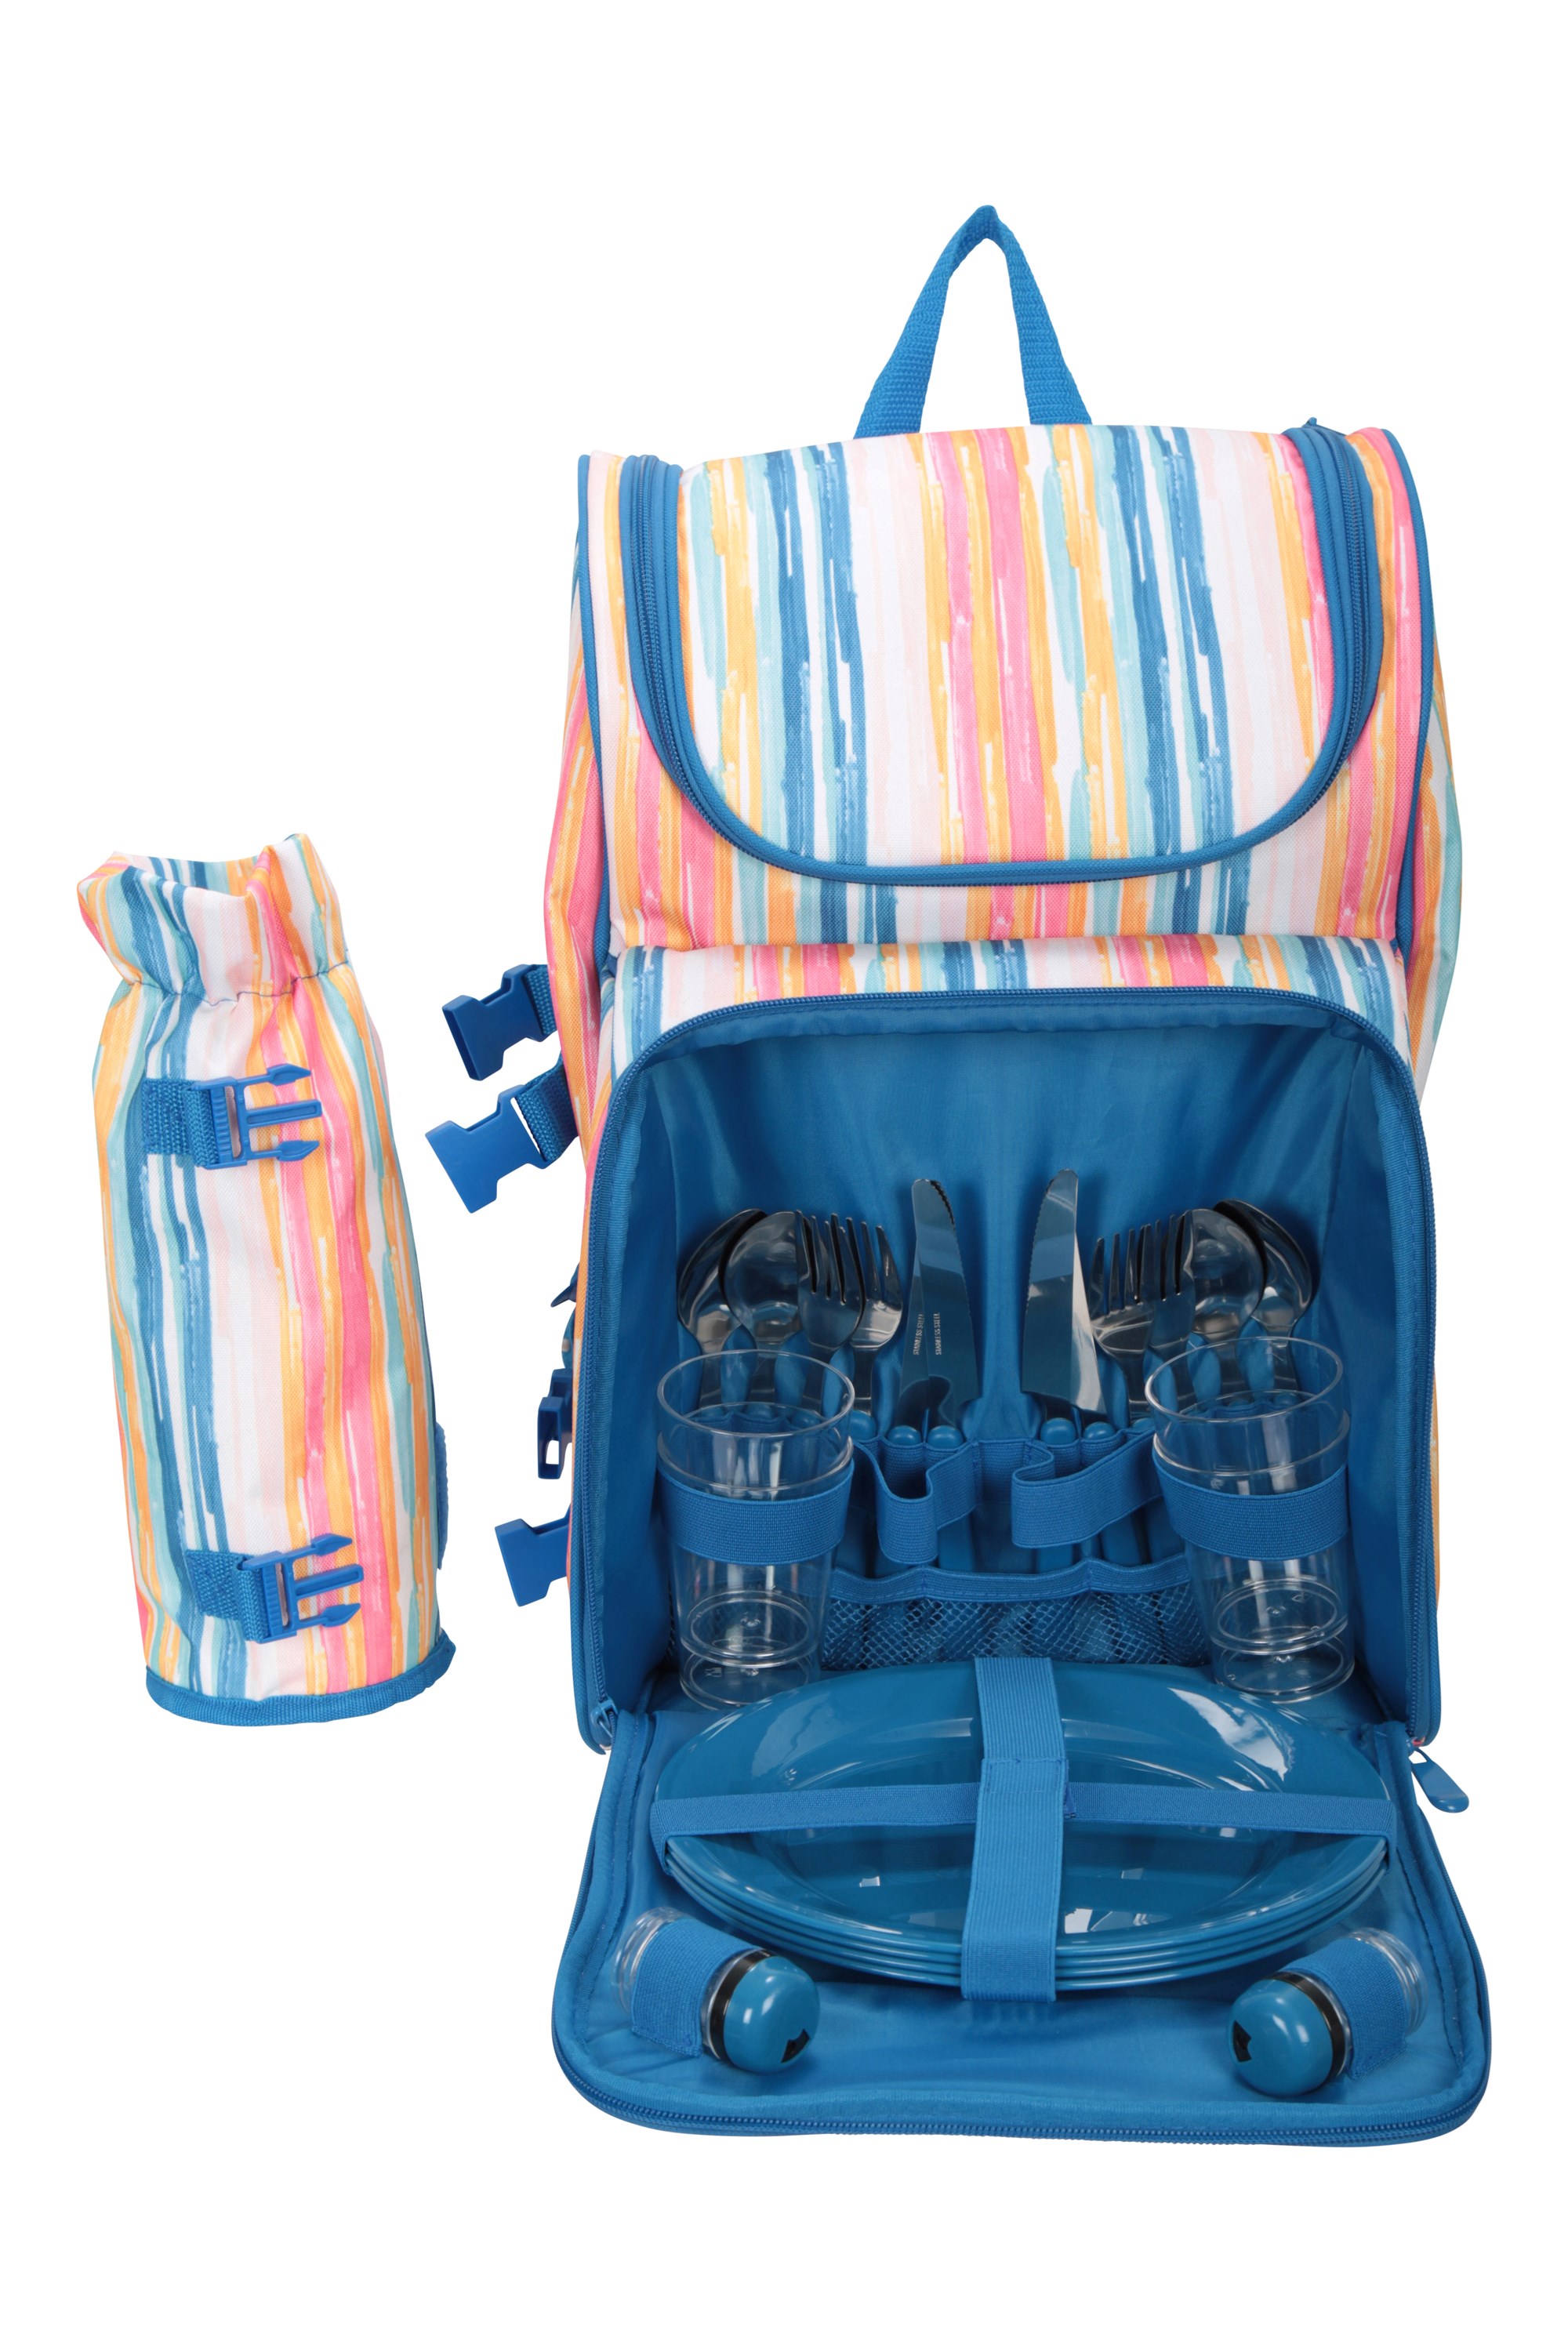 Mountain Warehouse Tote 4 Person Picnic Set Patterned 